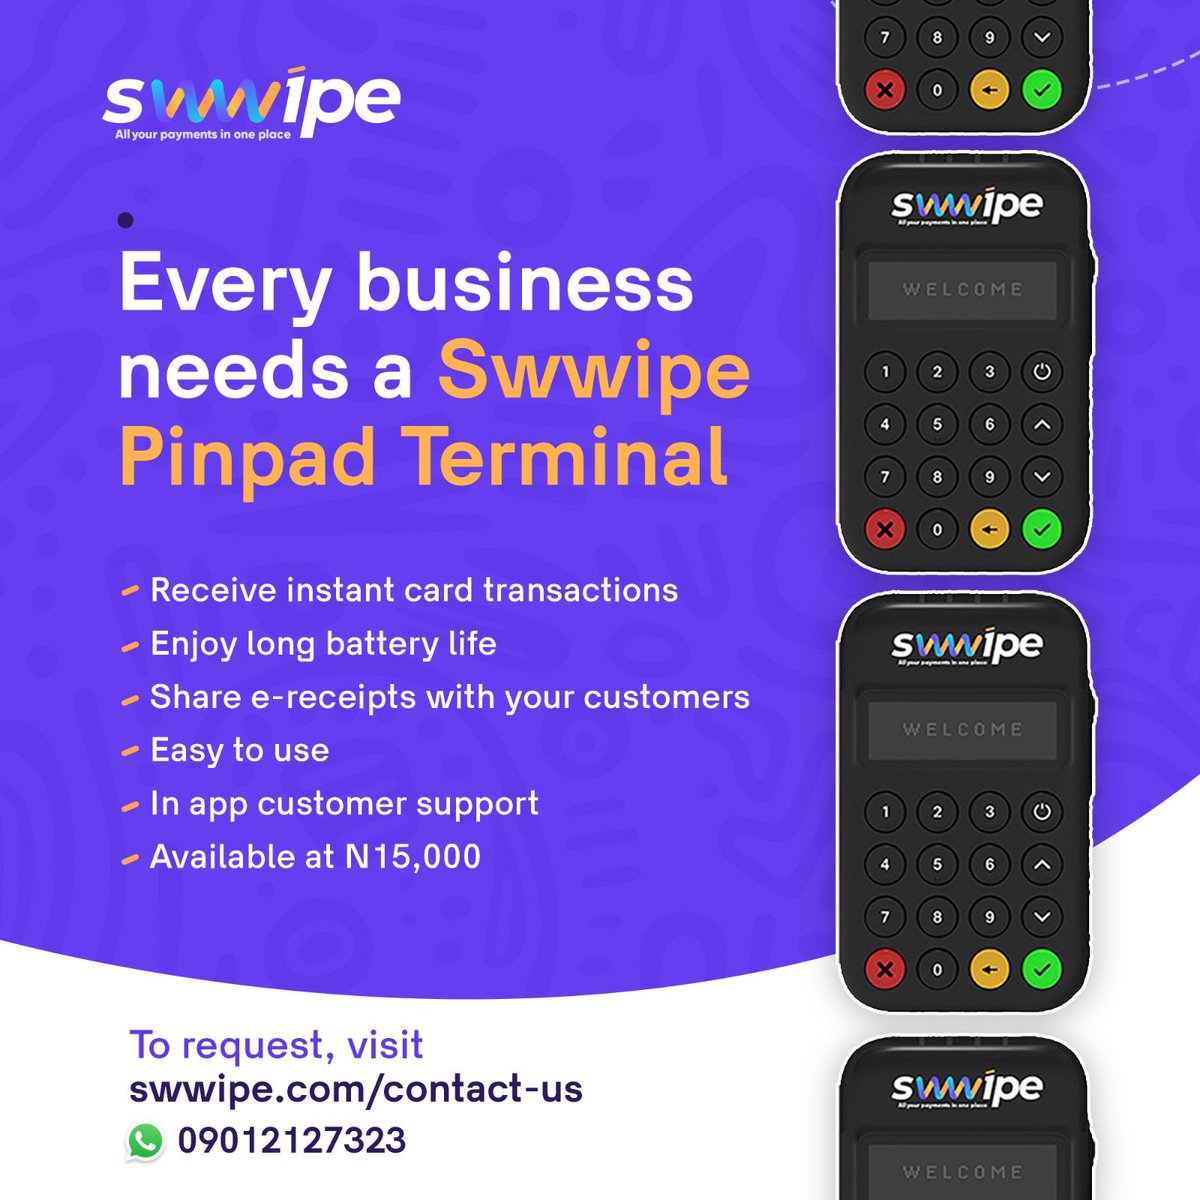 Why settle for less when you can have the best? With Swwipe Pinpad Terminal, you will never miss a sale. Receive instant card transactions, enjoy long battery life, no sales target, share e-receipts with your customers and so much more. 

Get yours today at just N15,000! Visit